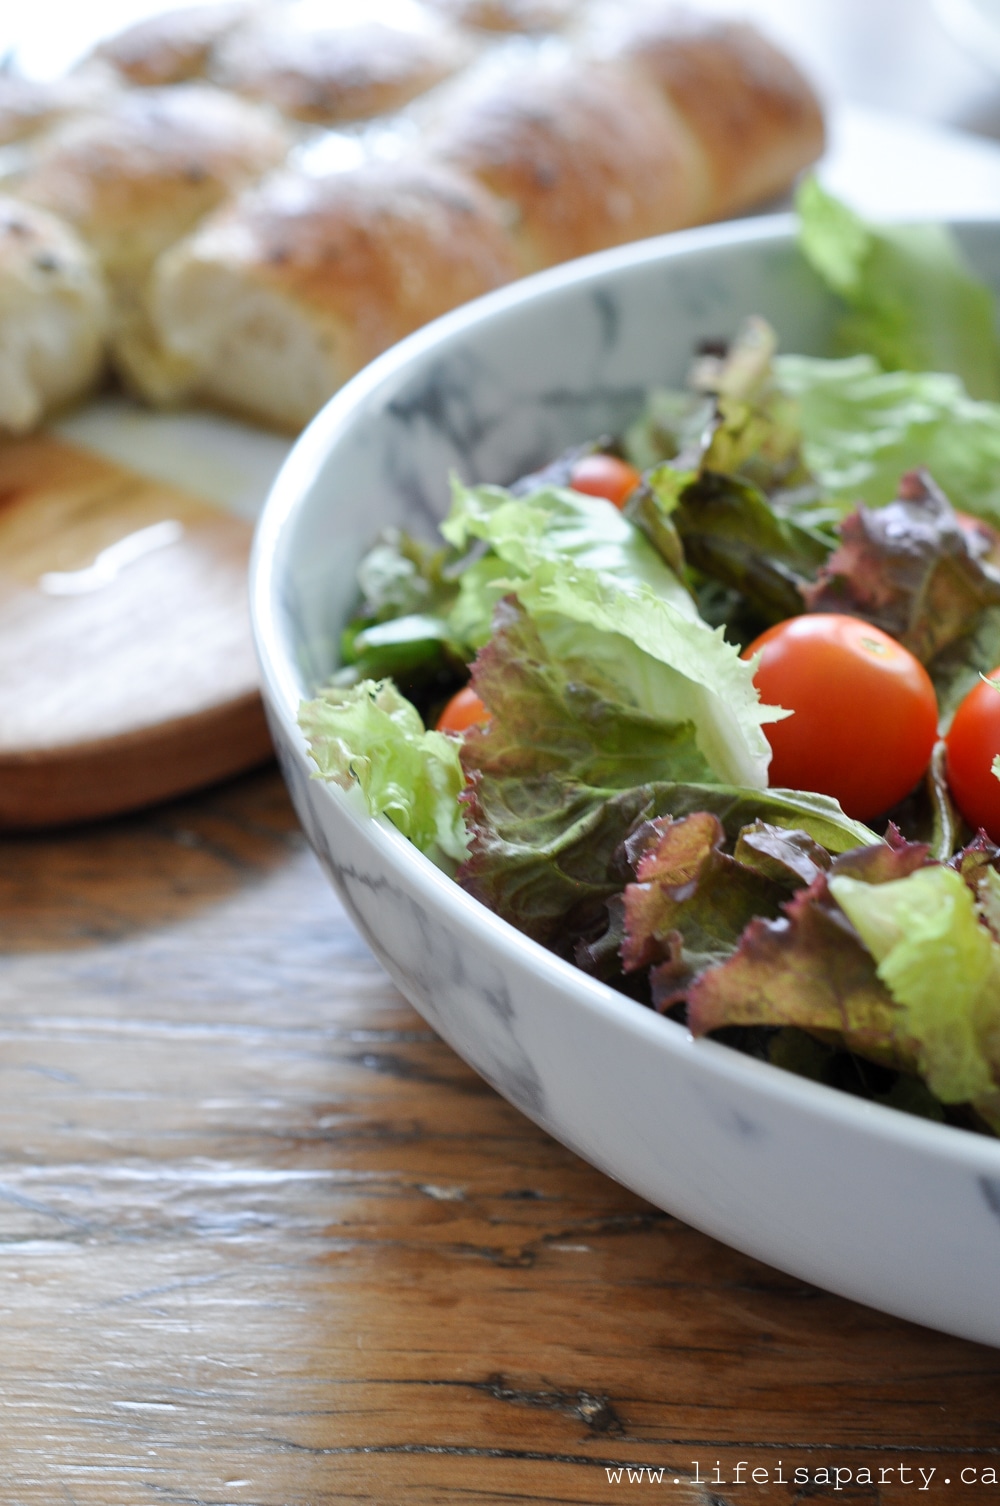 salad and bread